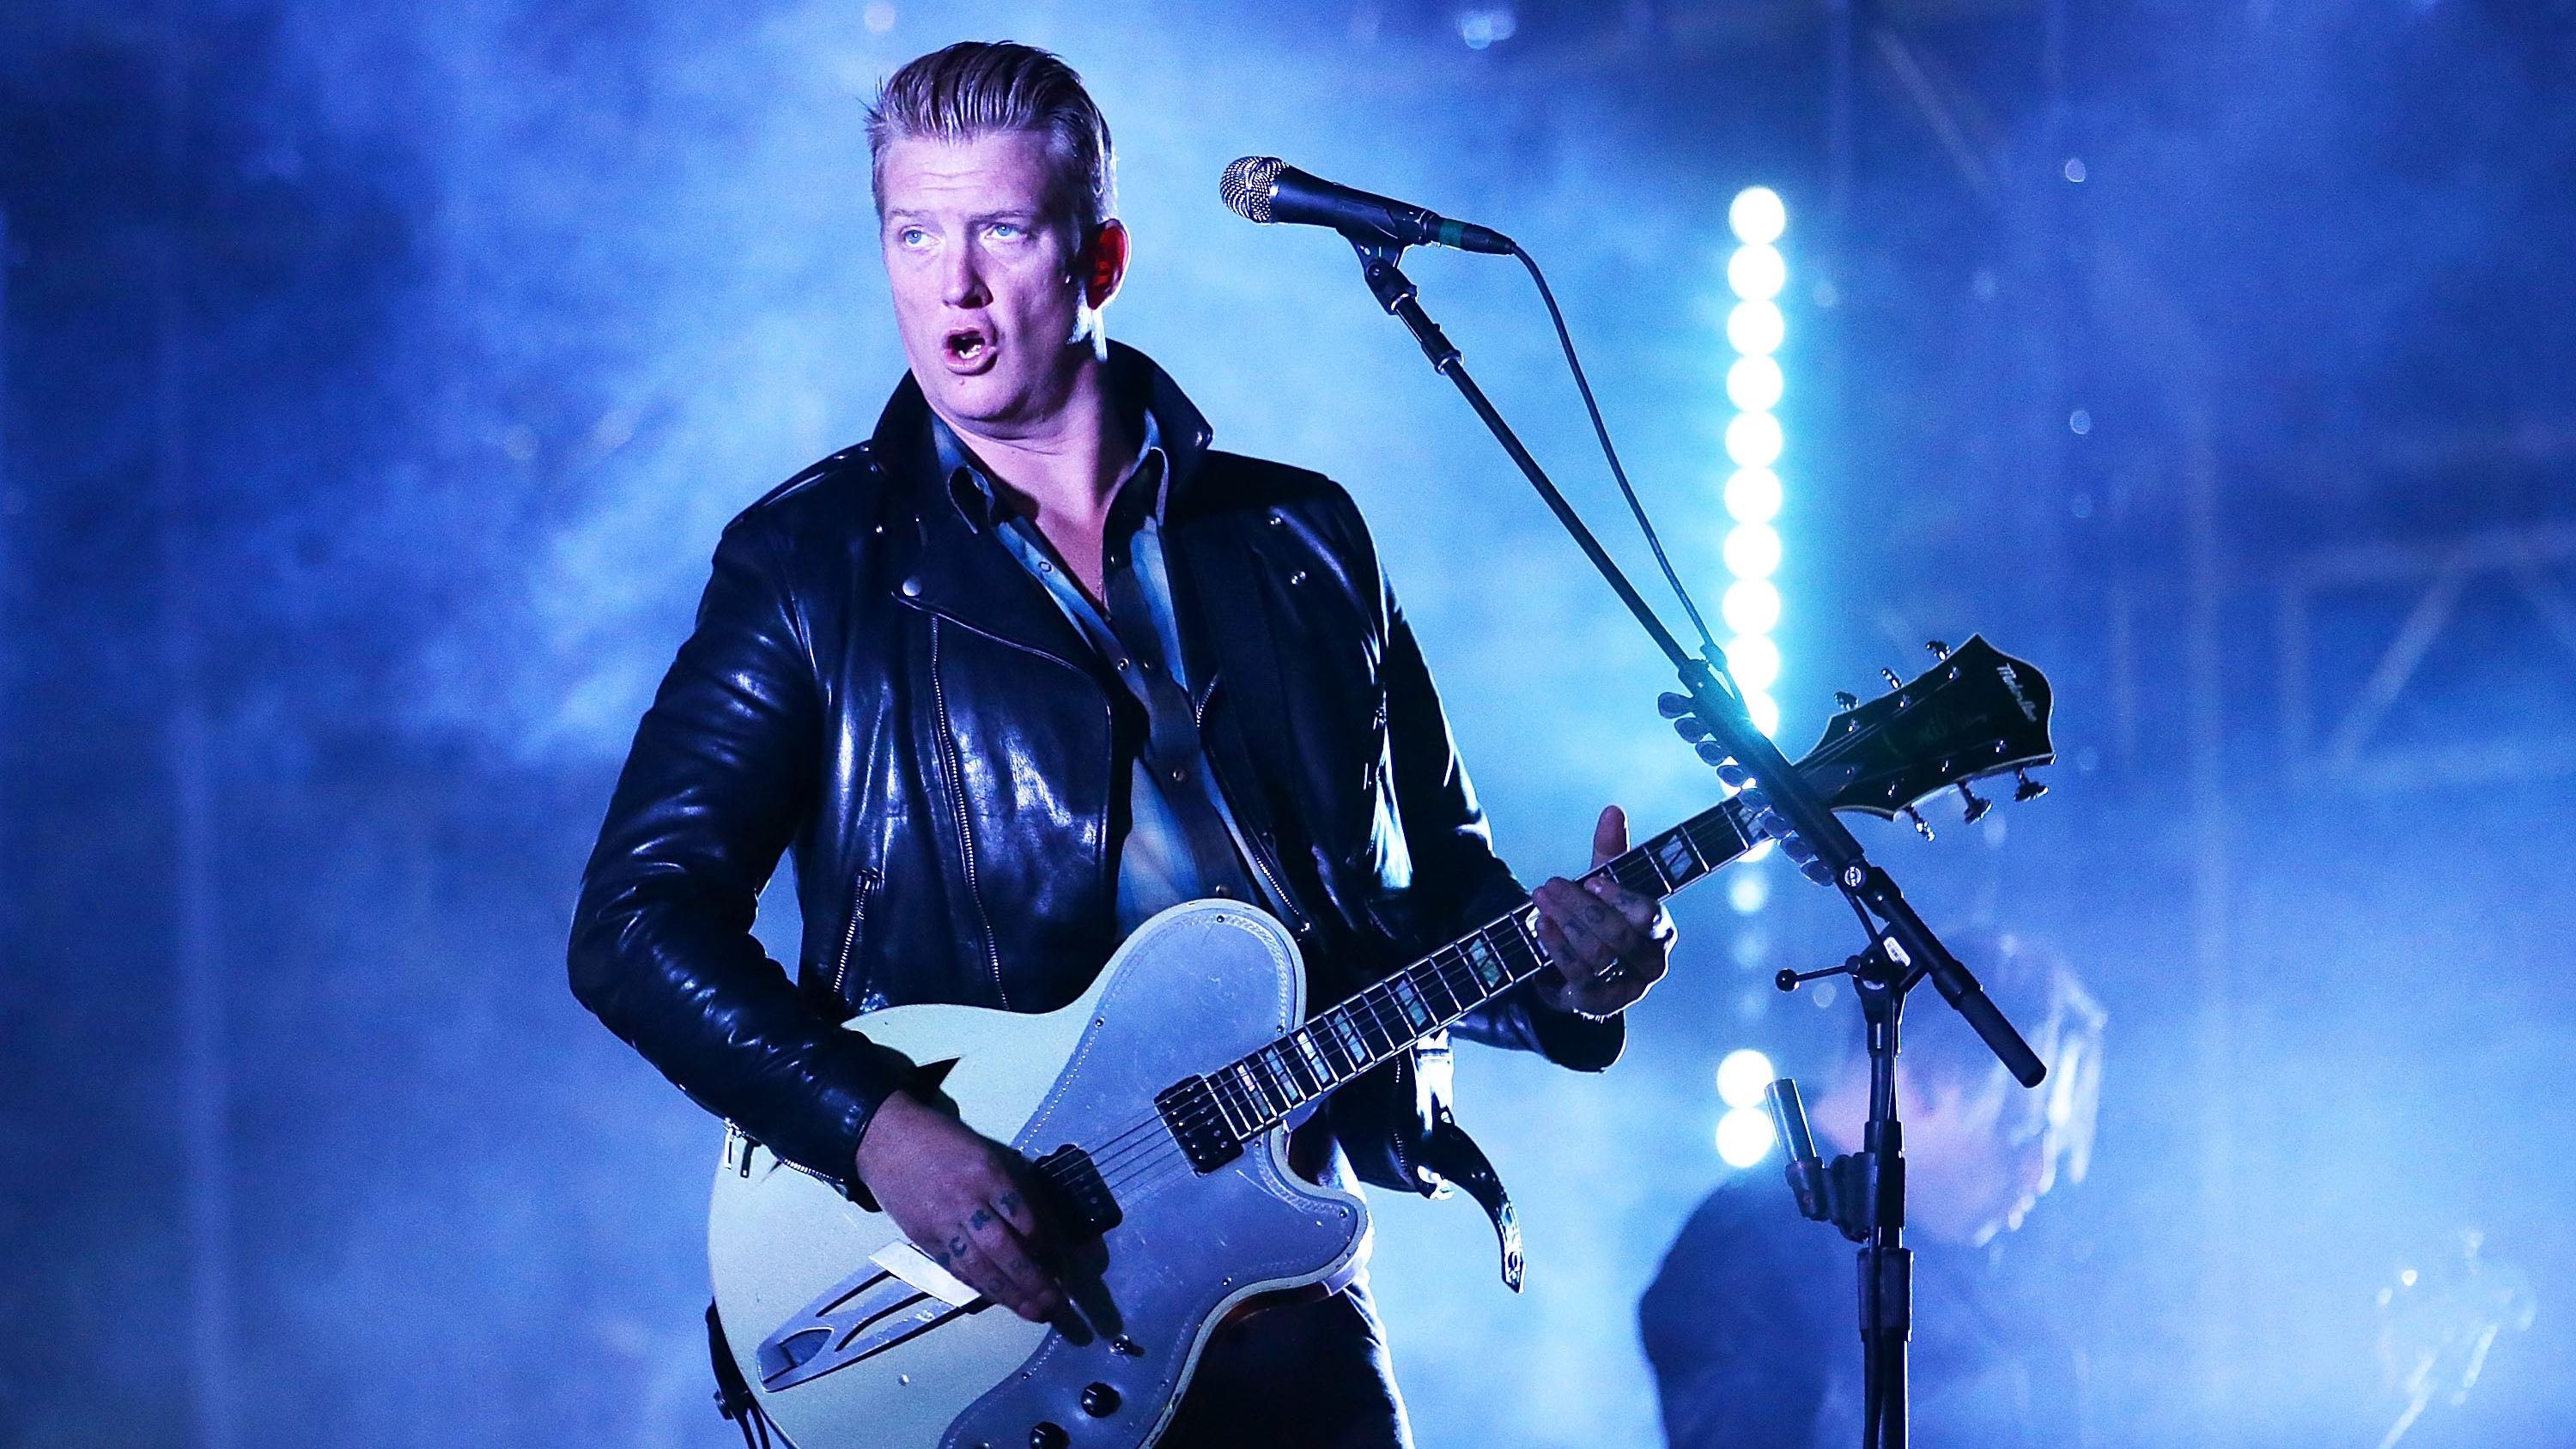 Queens Of The Stone Age frontman Josh Homme’s children file restraining order against him